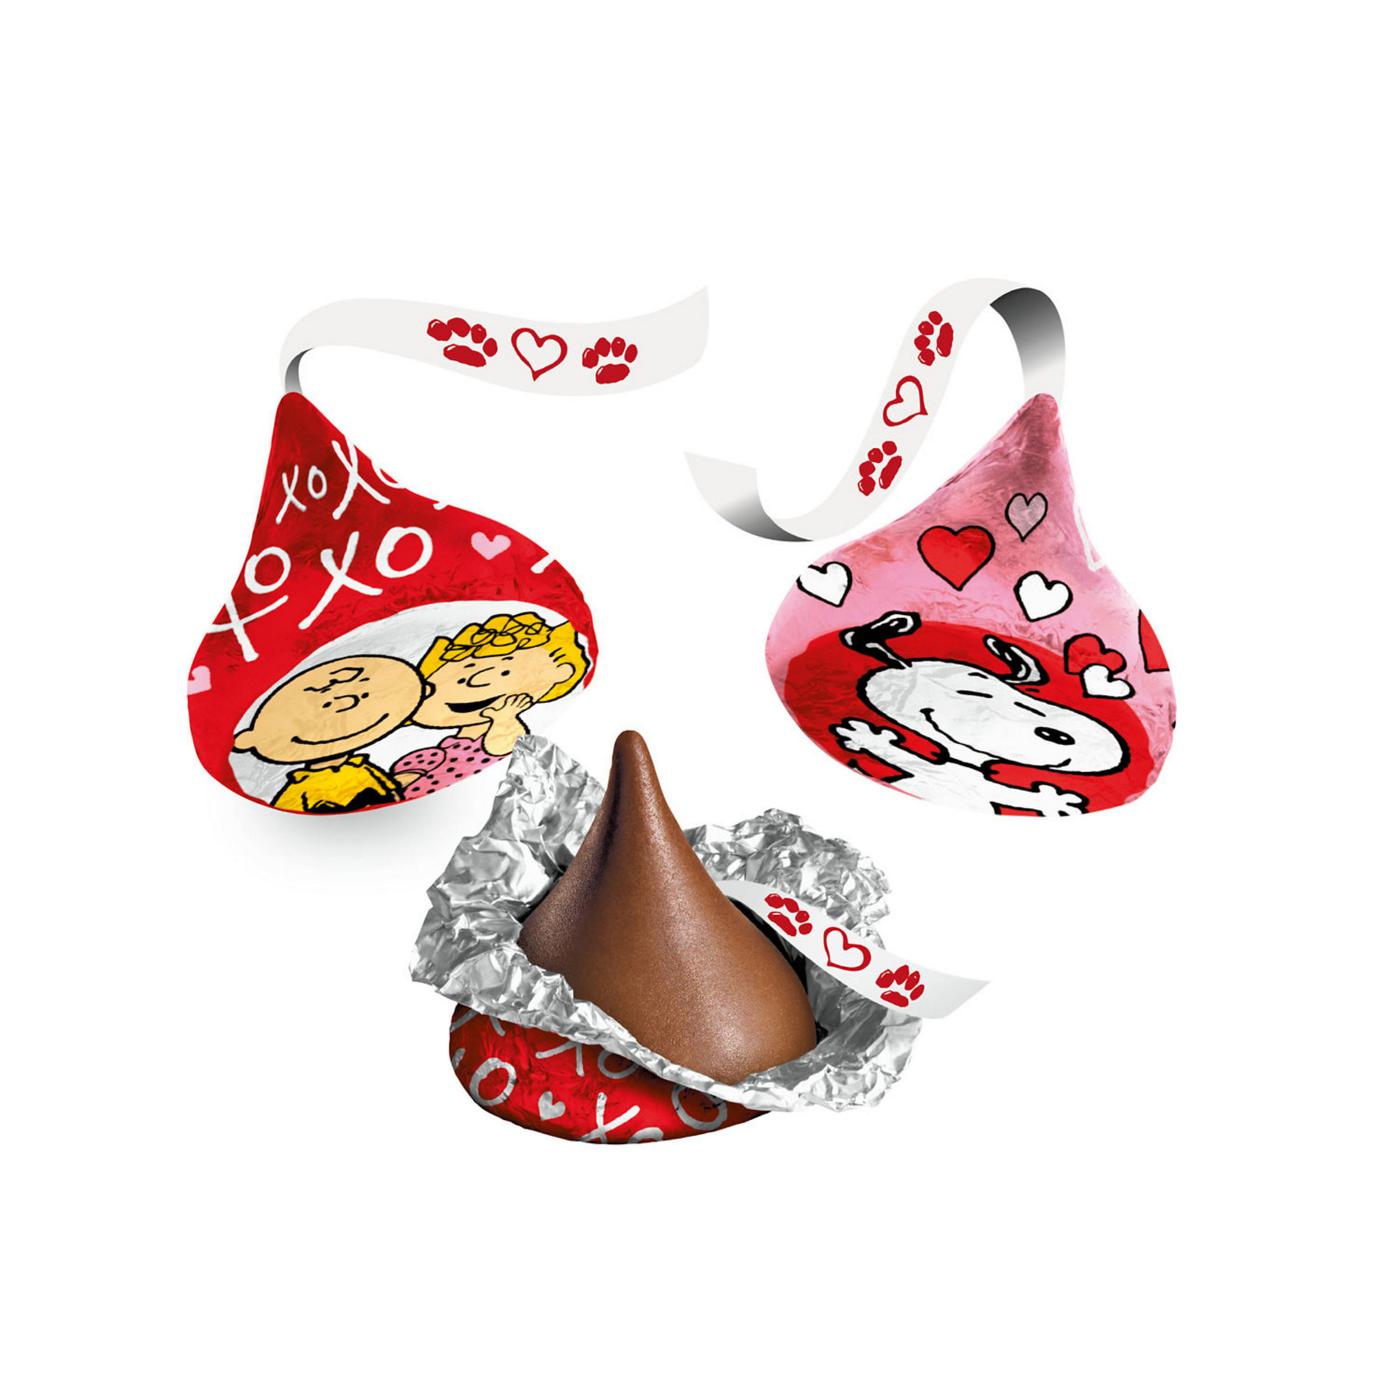 Hershey's Kisses Snoopy & Friends Milk Chocolate Candy; image 7 of 7